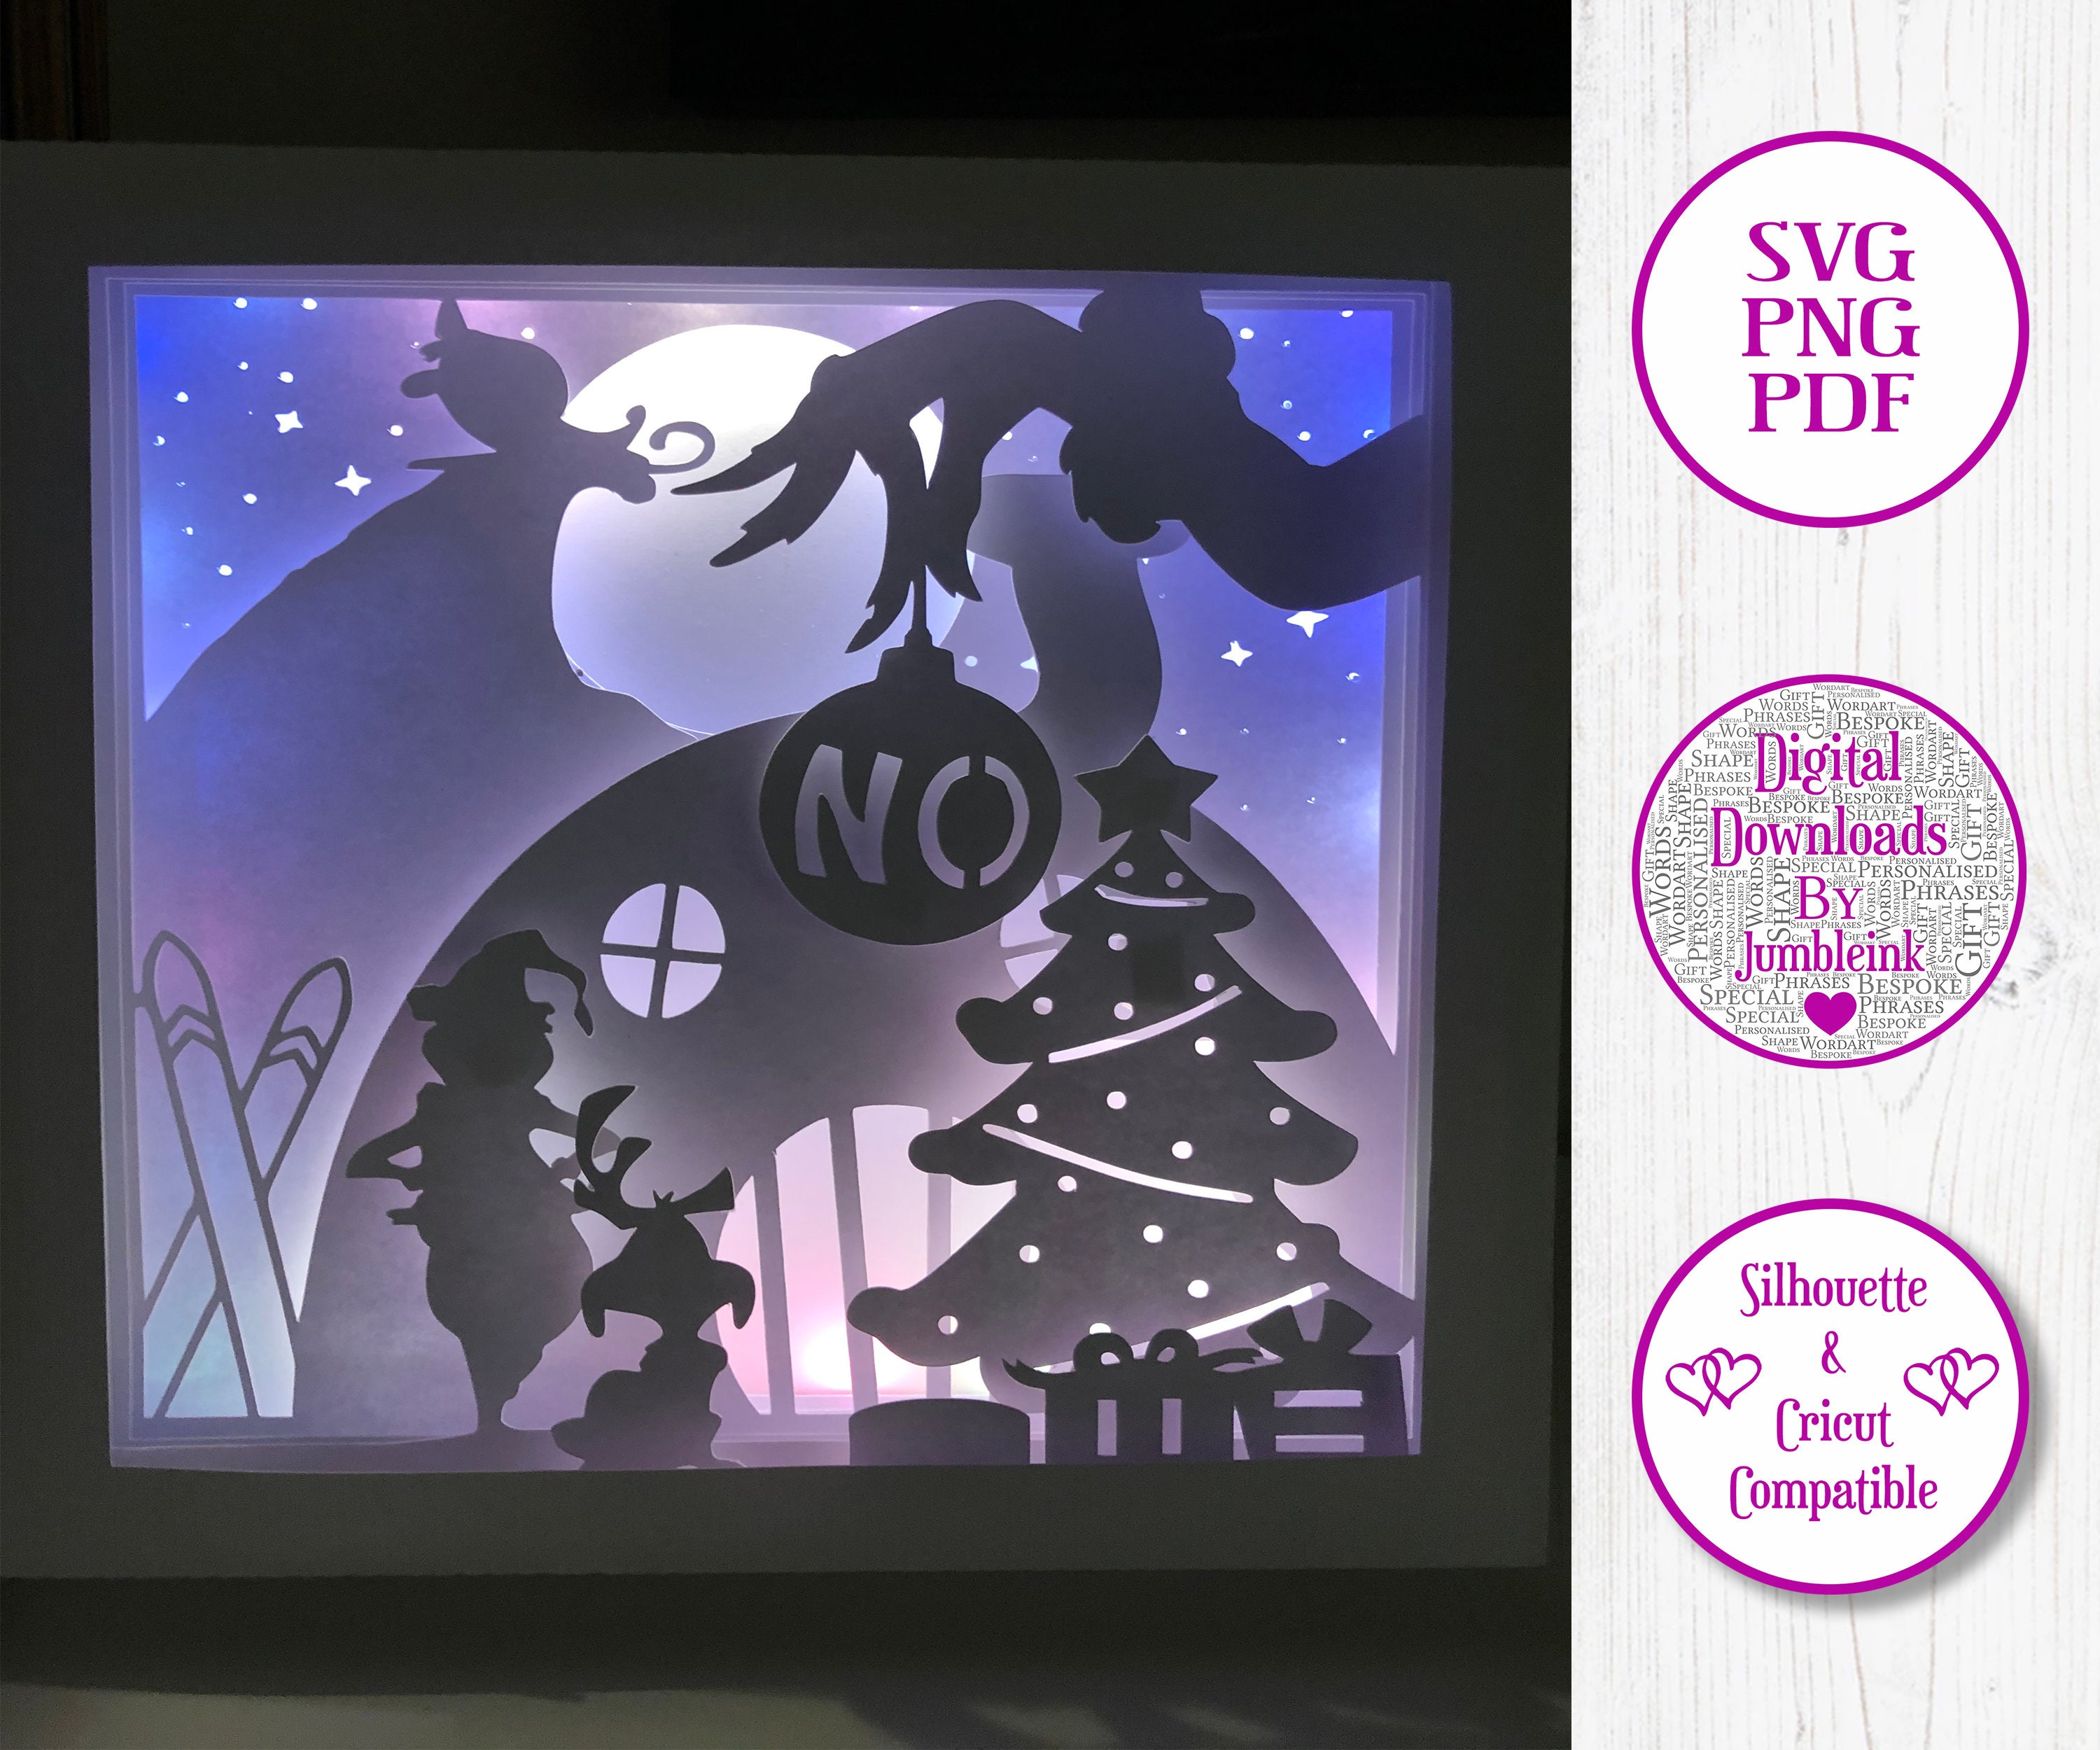 The Grinch Steals Christmas Paper Cut Light Box Template | Etsy